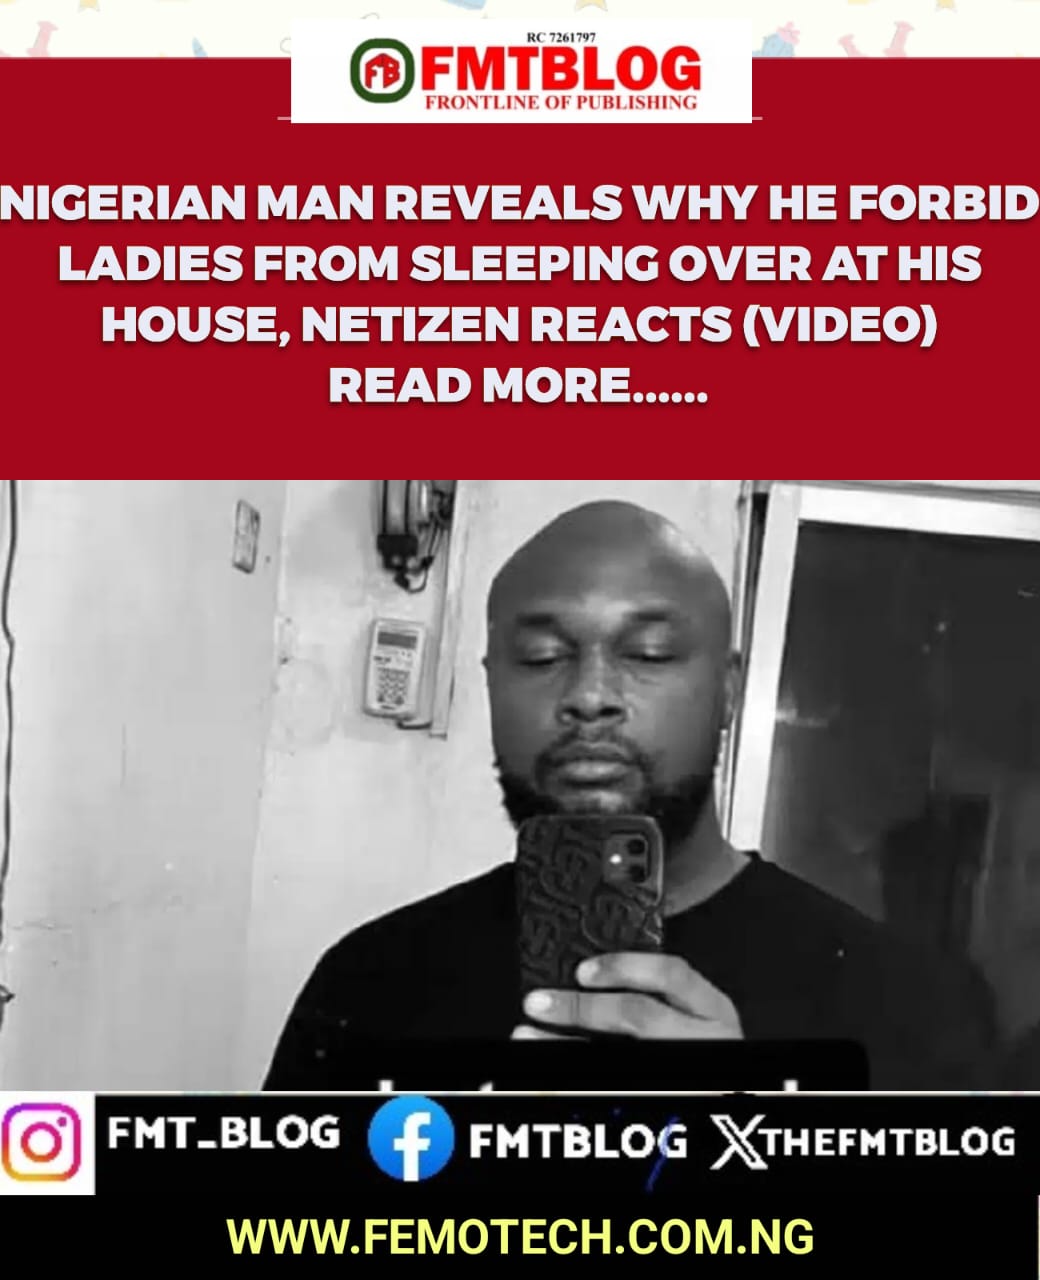 Nigerian Man Reveals Why He Forbid Ladies From Sleeping Over At His House, Netizen Reacts (VIDEO)